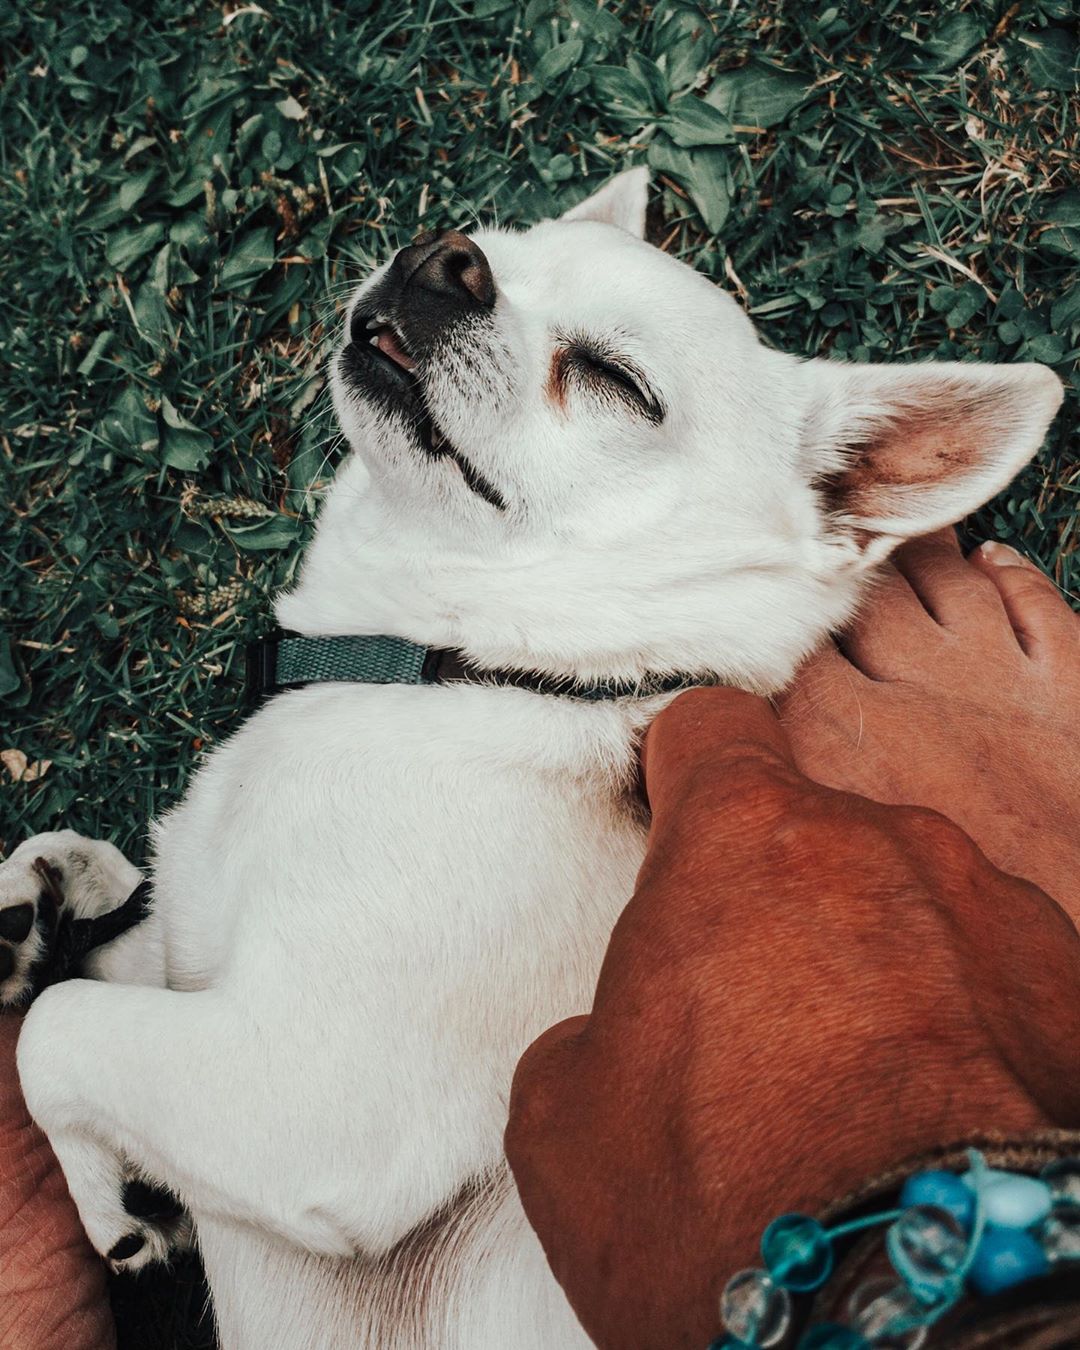 A Chihuahua sleeping on the grass while being pet by a person